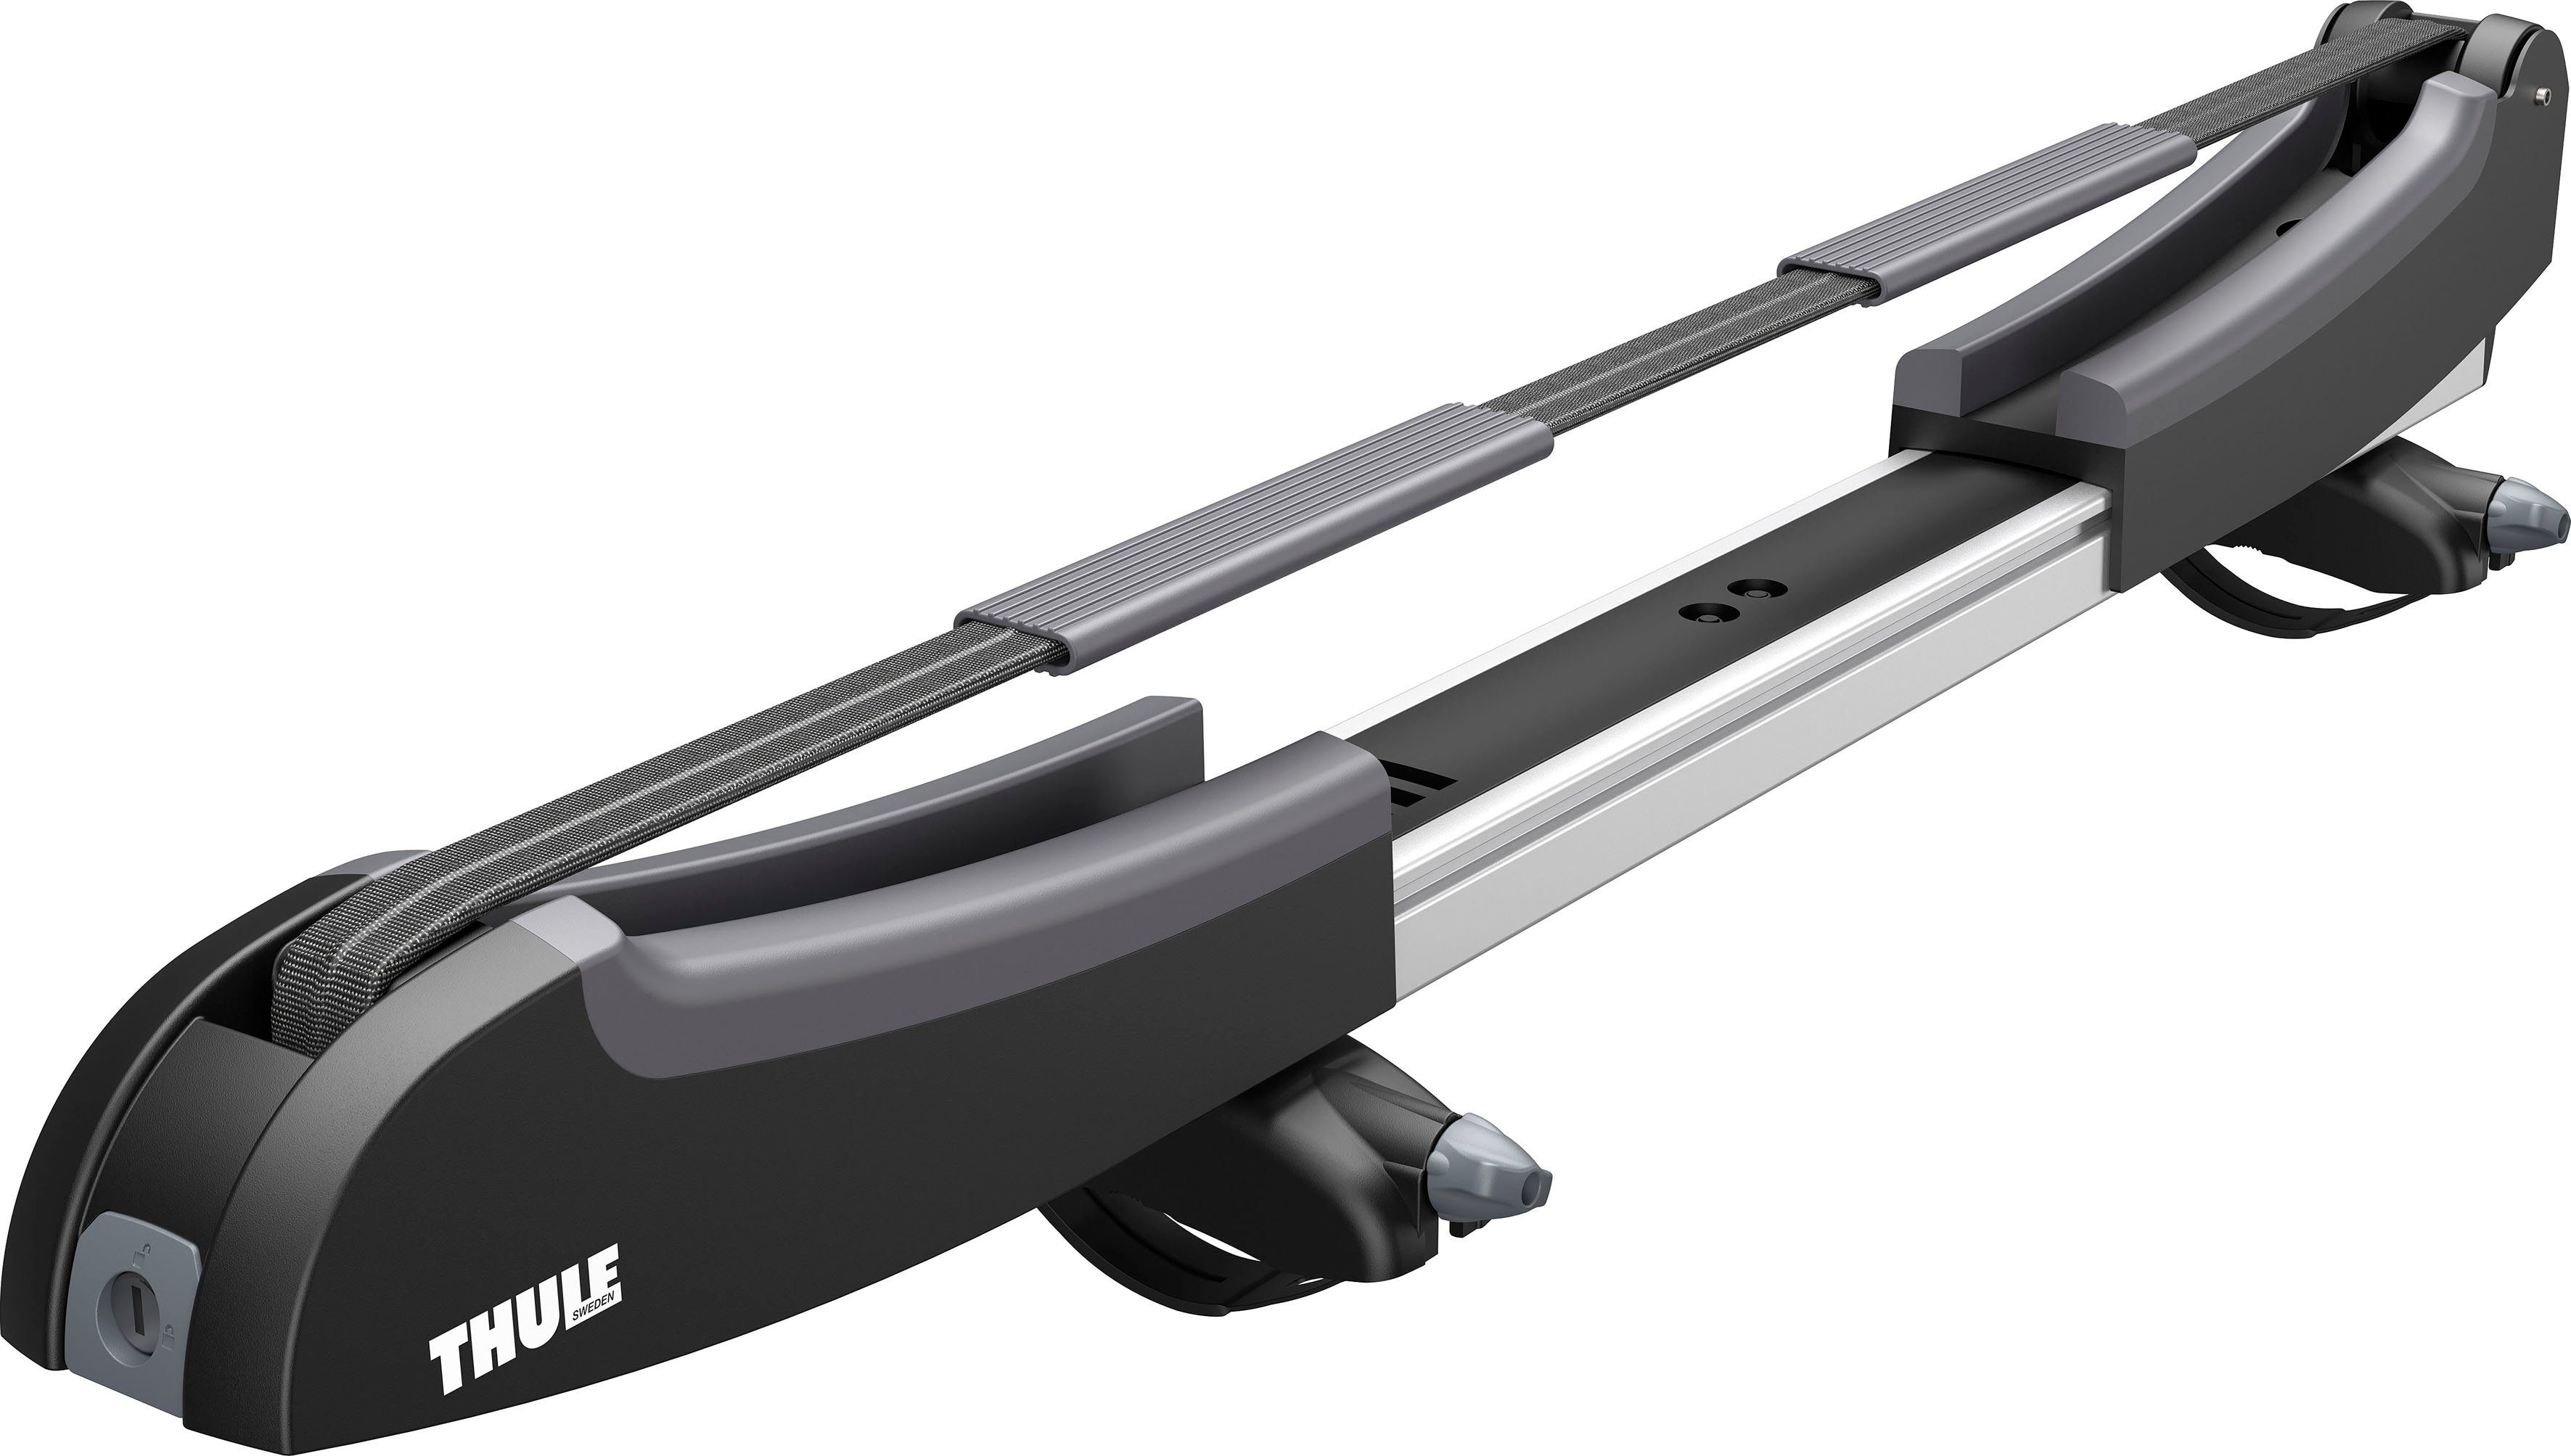 toll Thule Dachträger SUP Taxi XT, für SUP-Boards